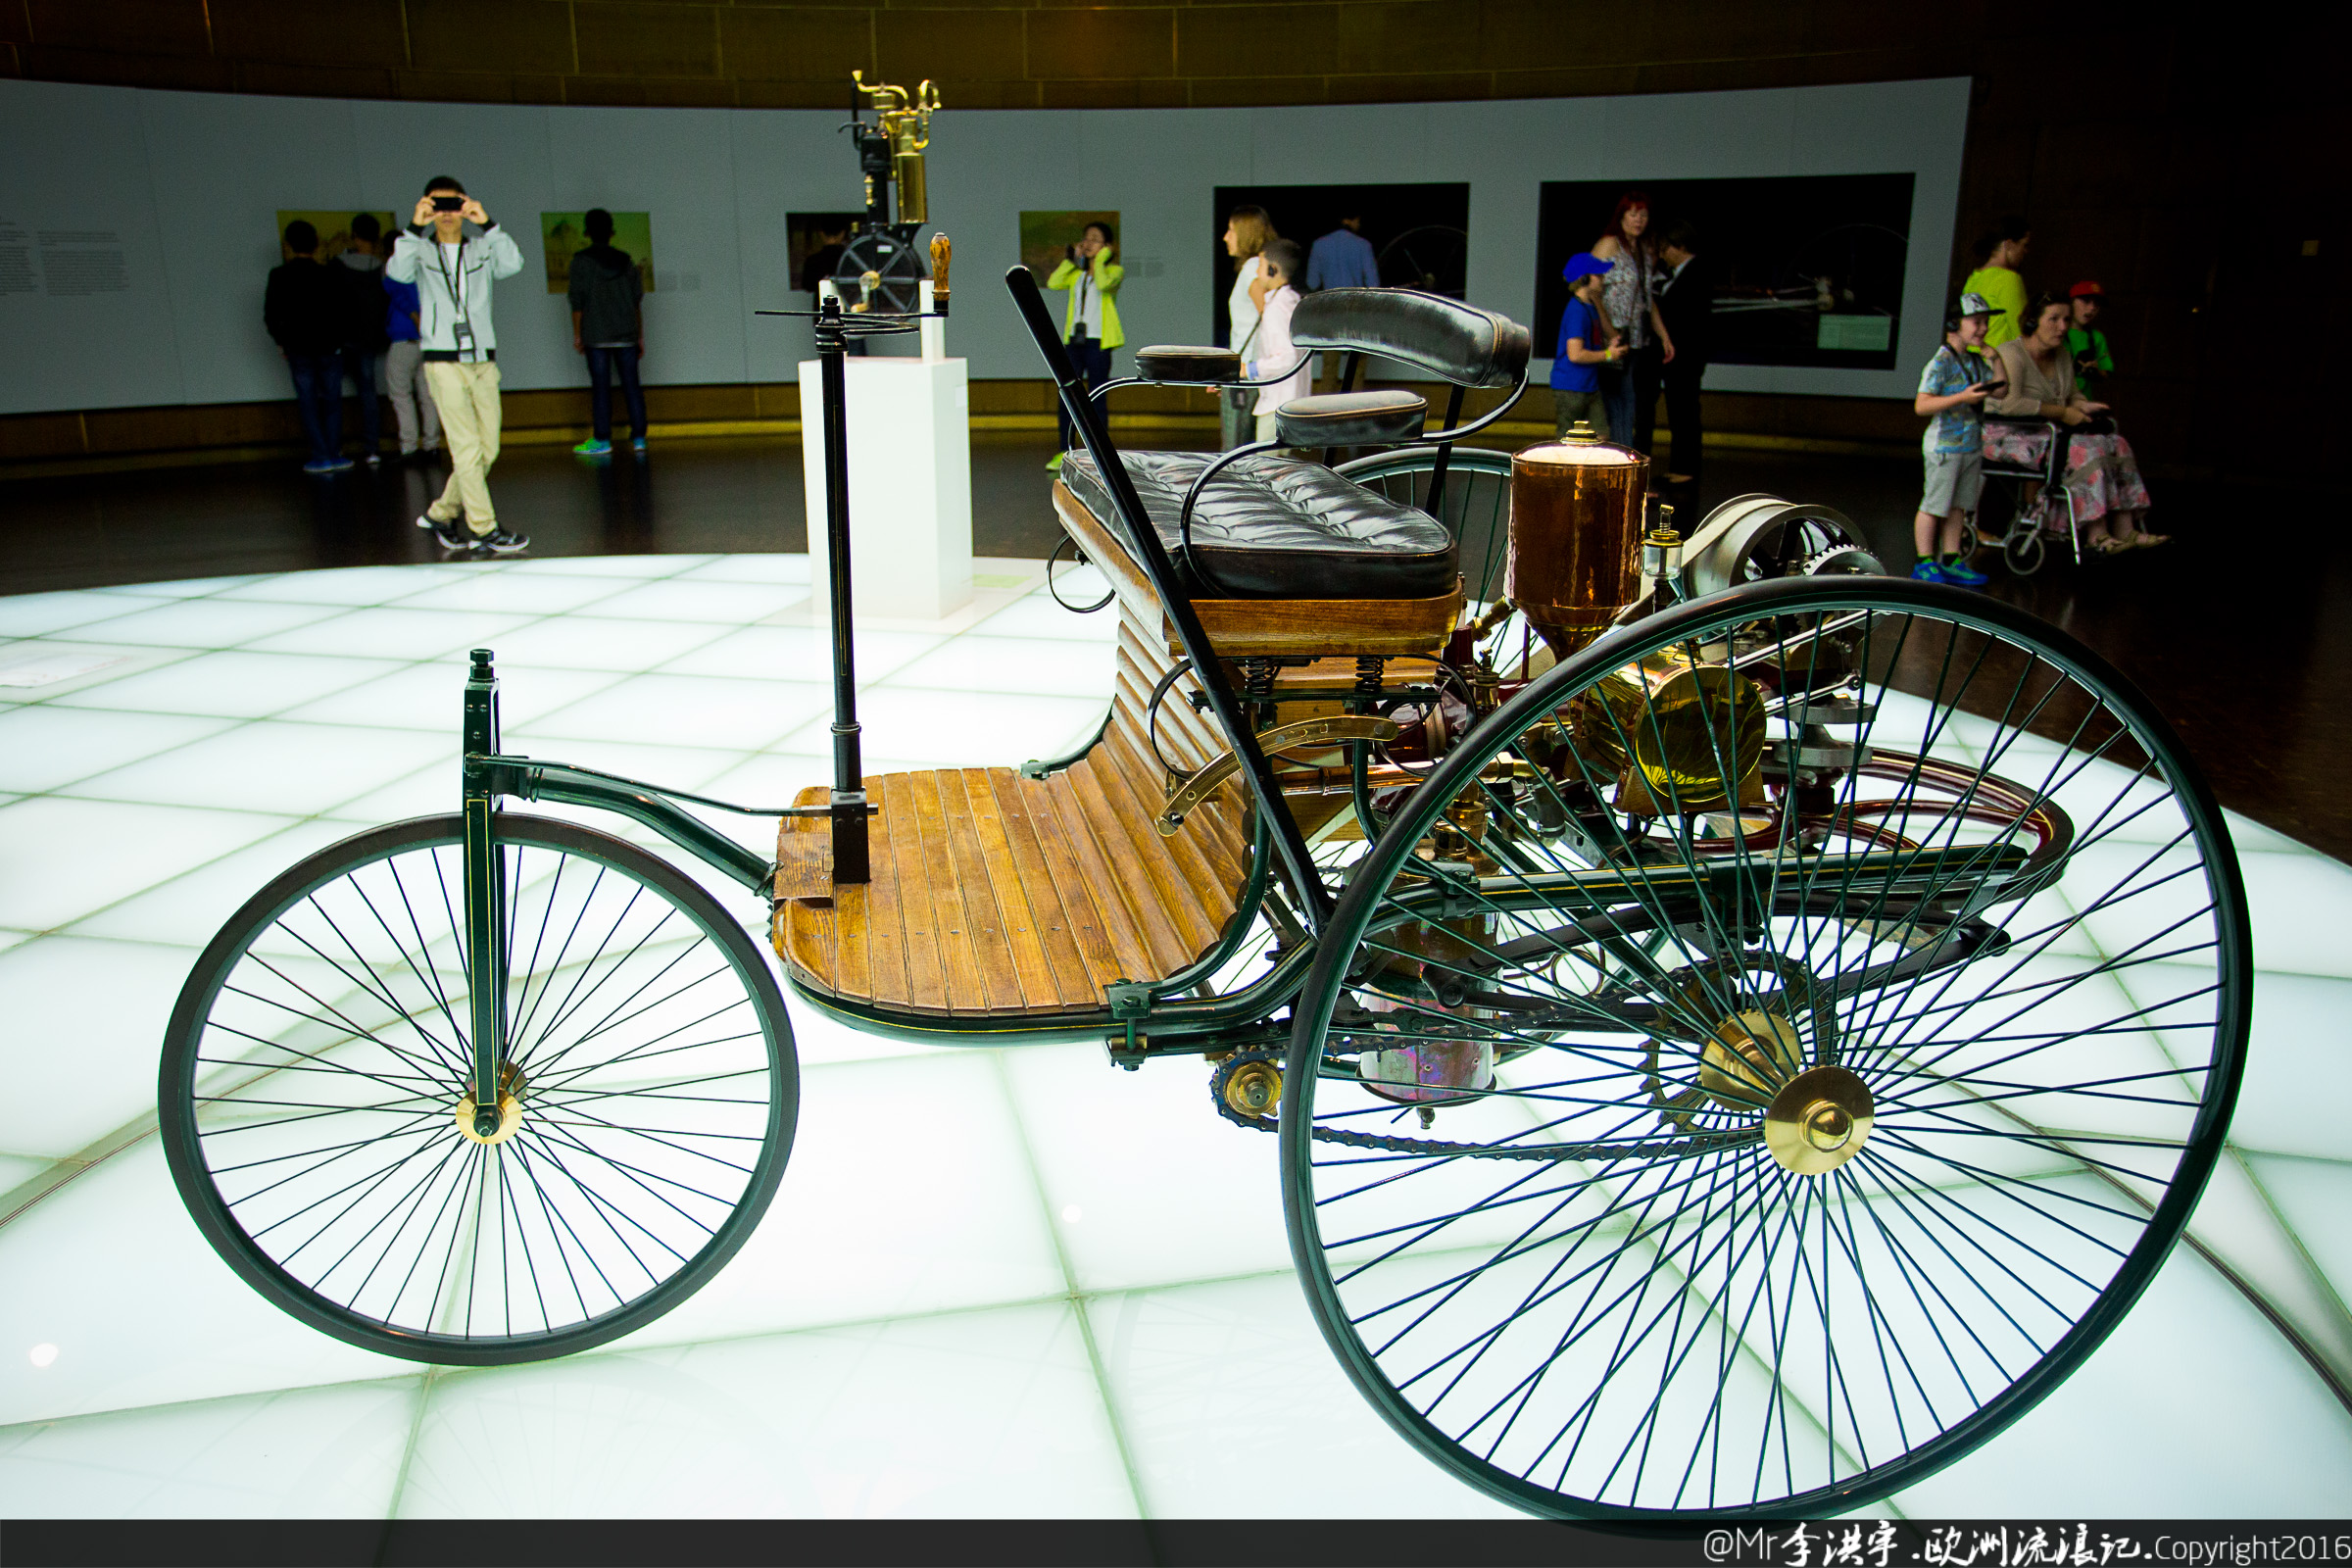 Mercedes-Benz Invented the First Car in the World - Philippine Automotive